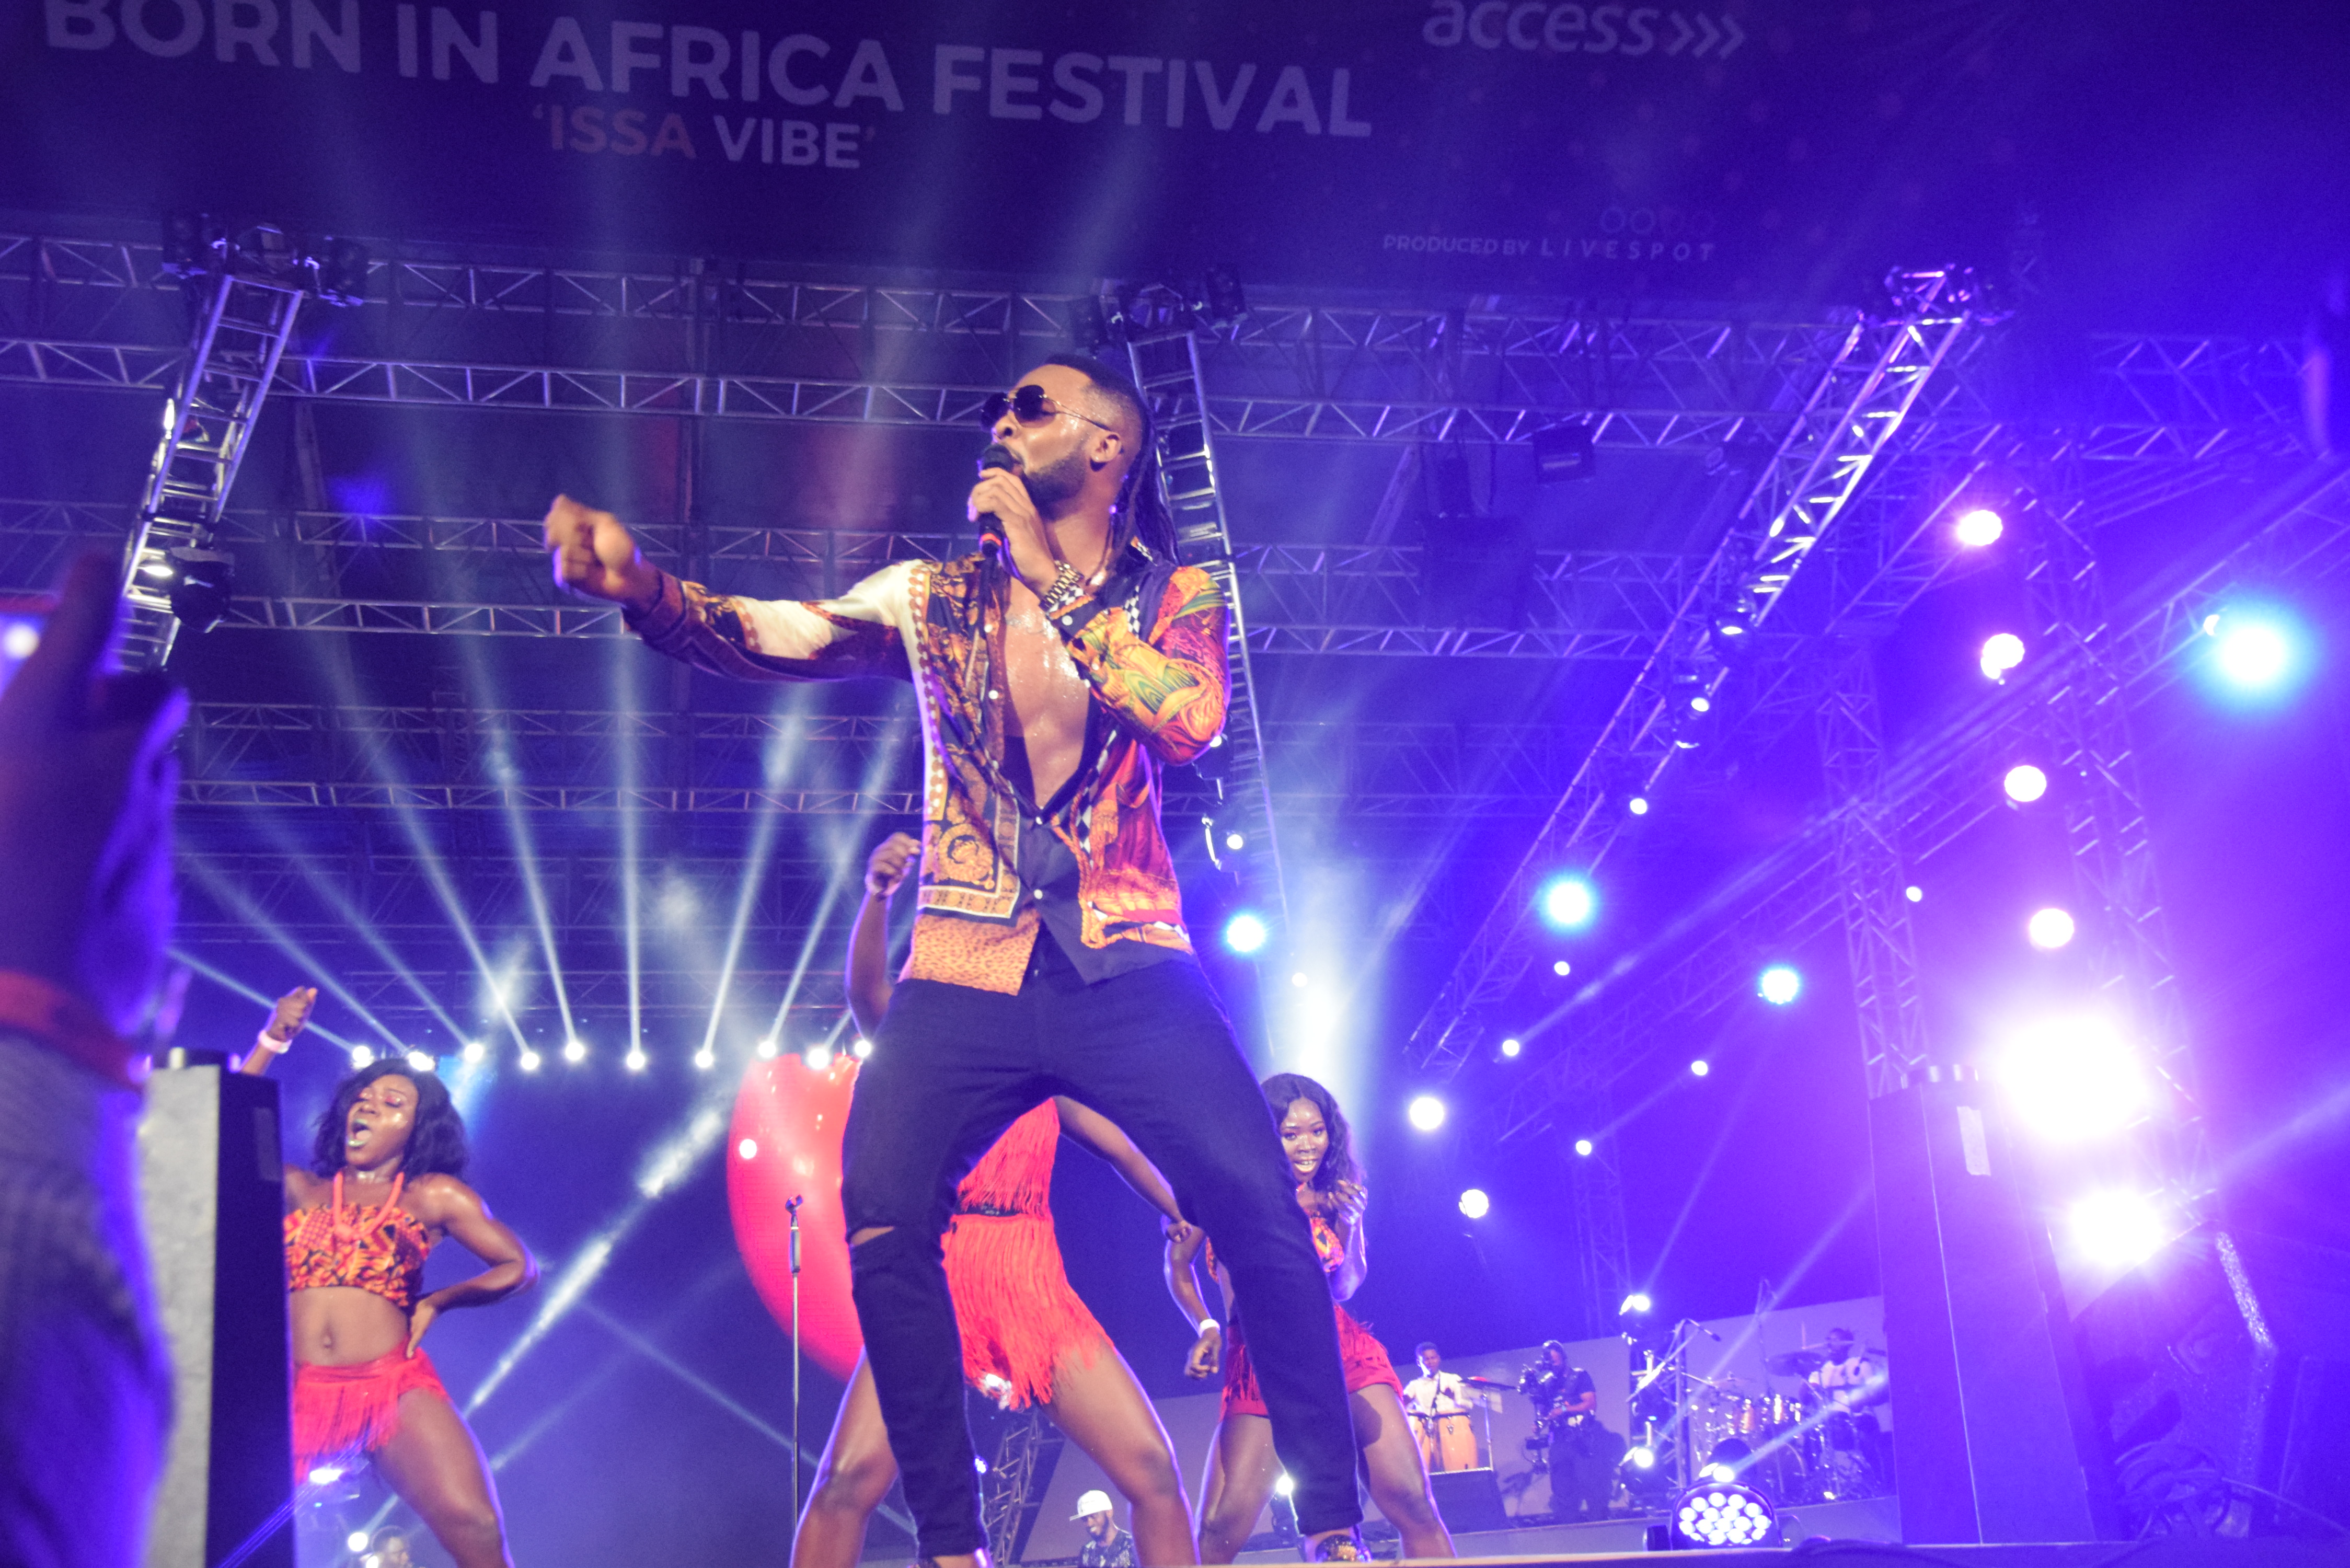 Models strutting the runway during Flavour’s performance